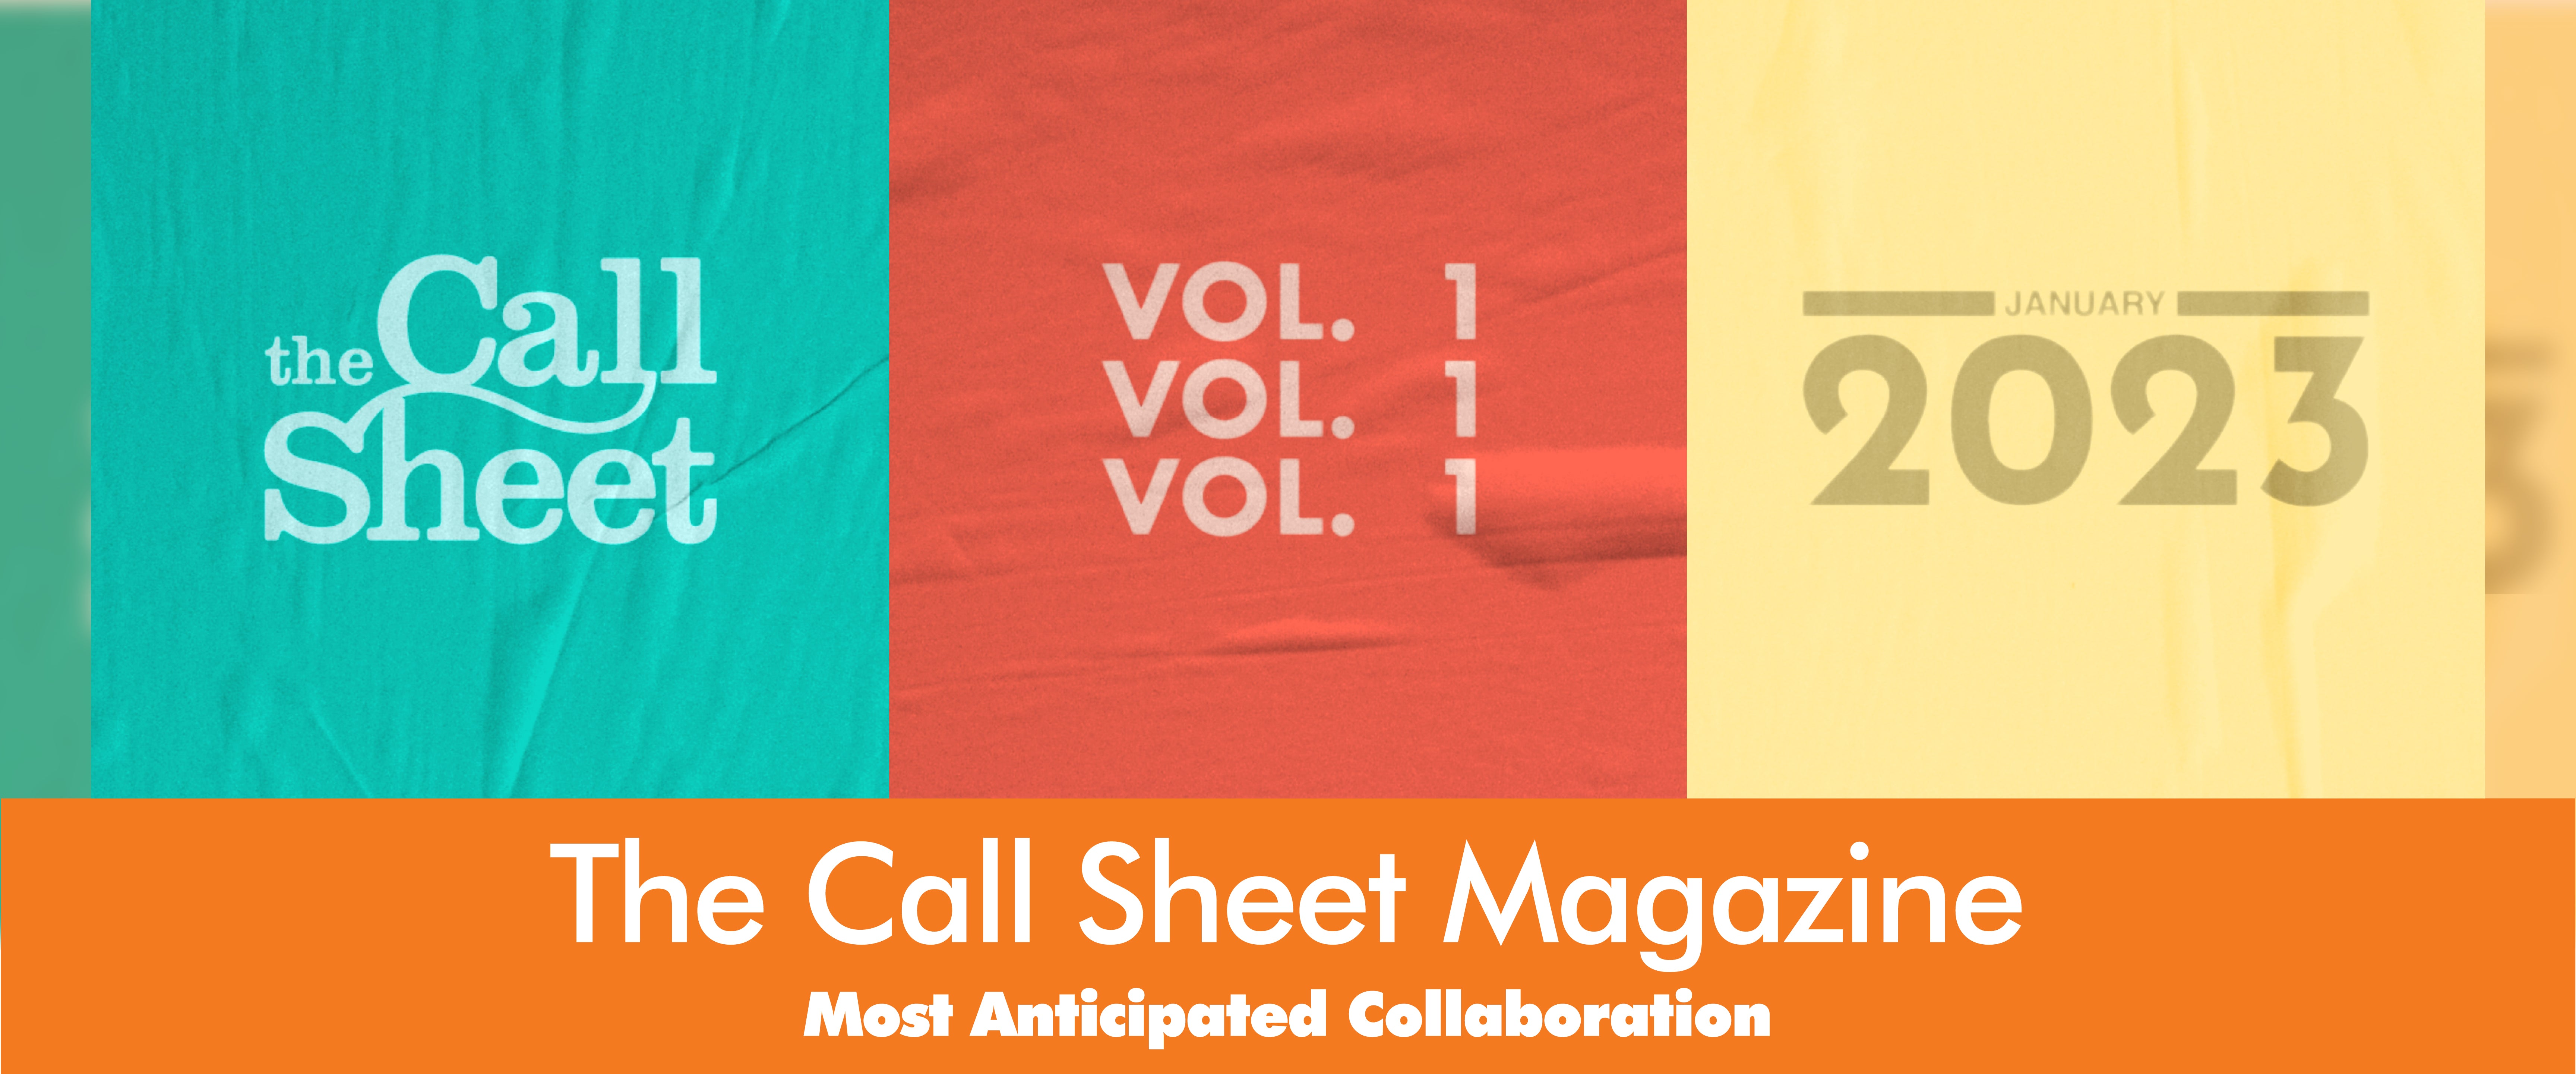 The most anticipated collaboration of 2023 is The Call Sheet magazine. Pictured here are graphics for the logo, the release date in January 2023, and the fact that the issue will be Volume 1.